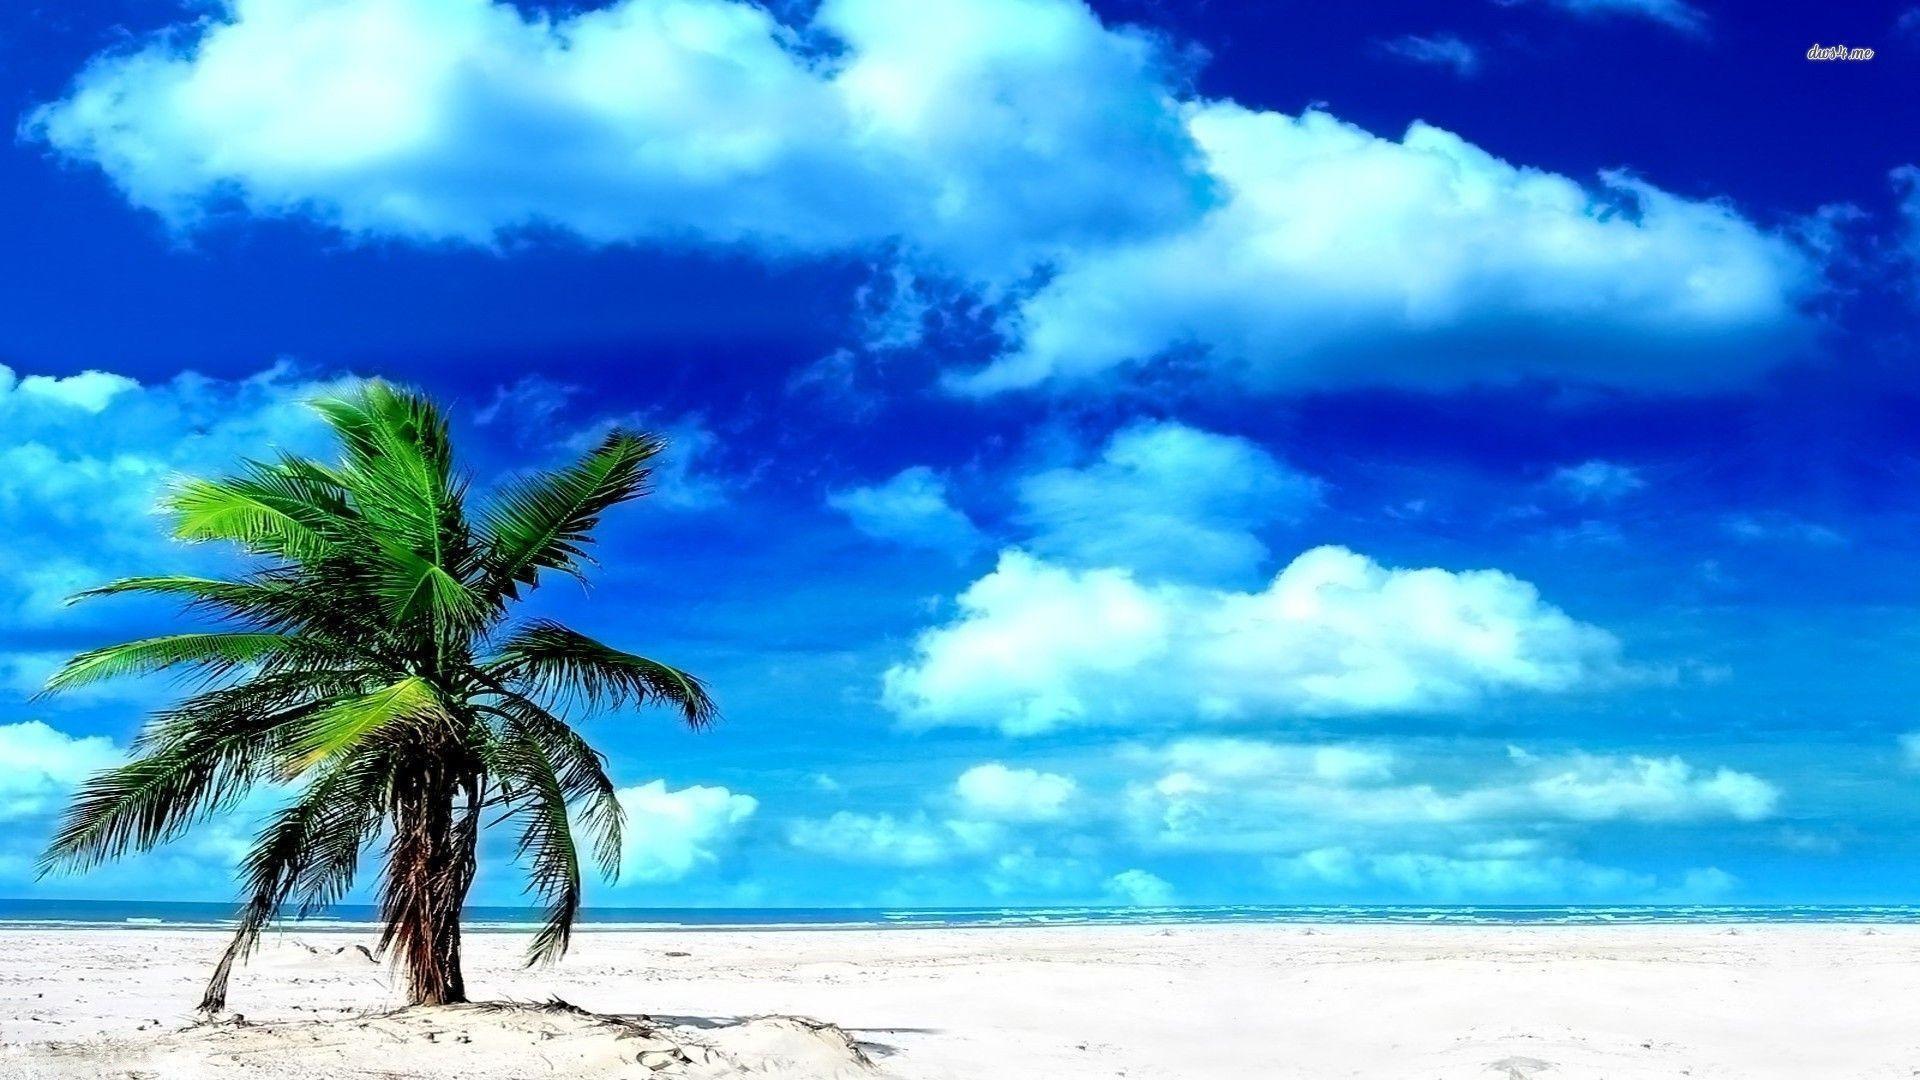 Background Lonely Palm Tree Beach Wallpaper. Wallpaper Love